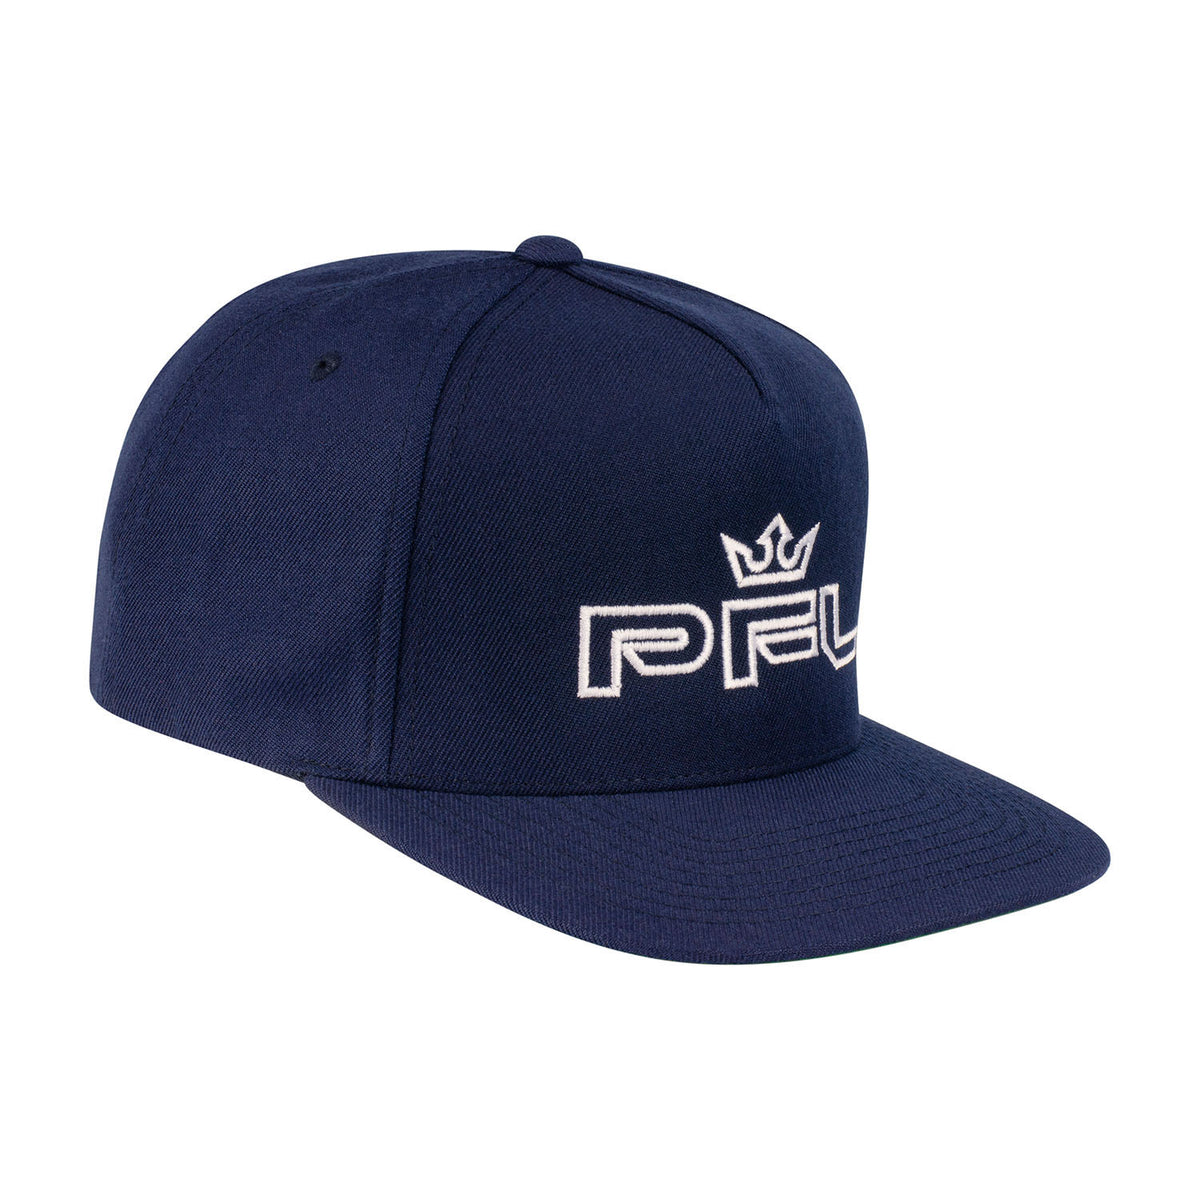 PFL Flatbill Snapback Hat in Navy - Right Side View